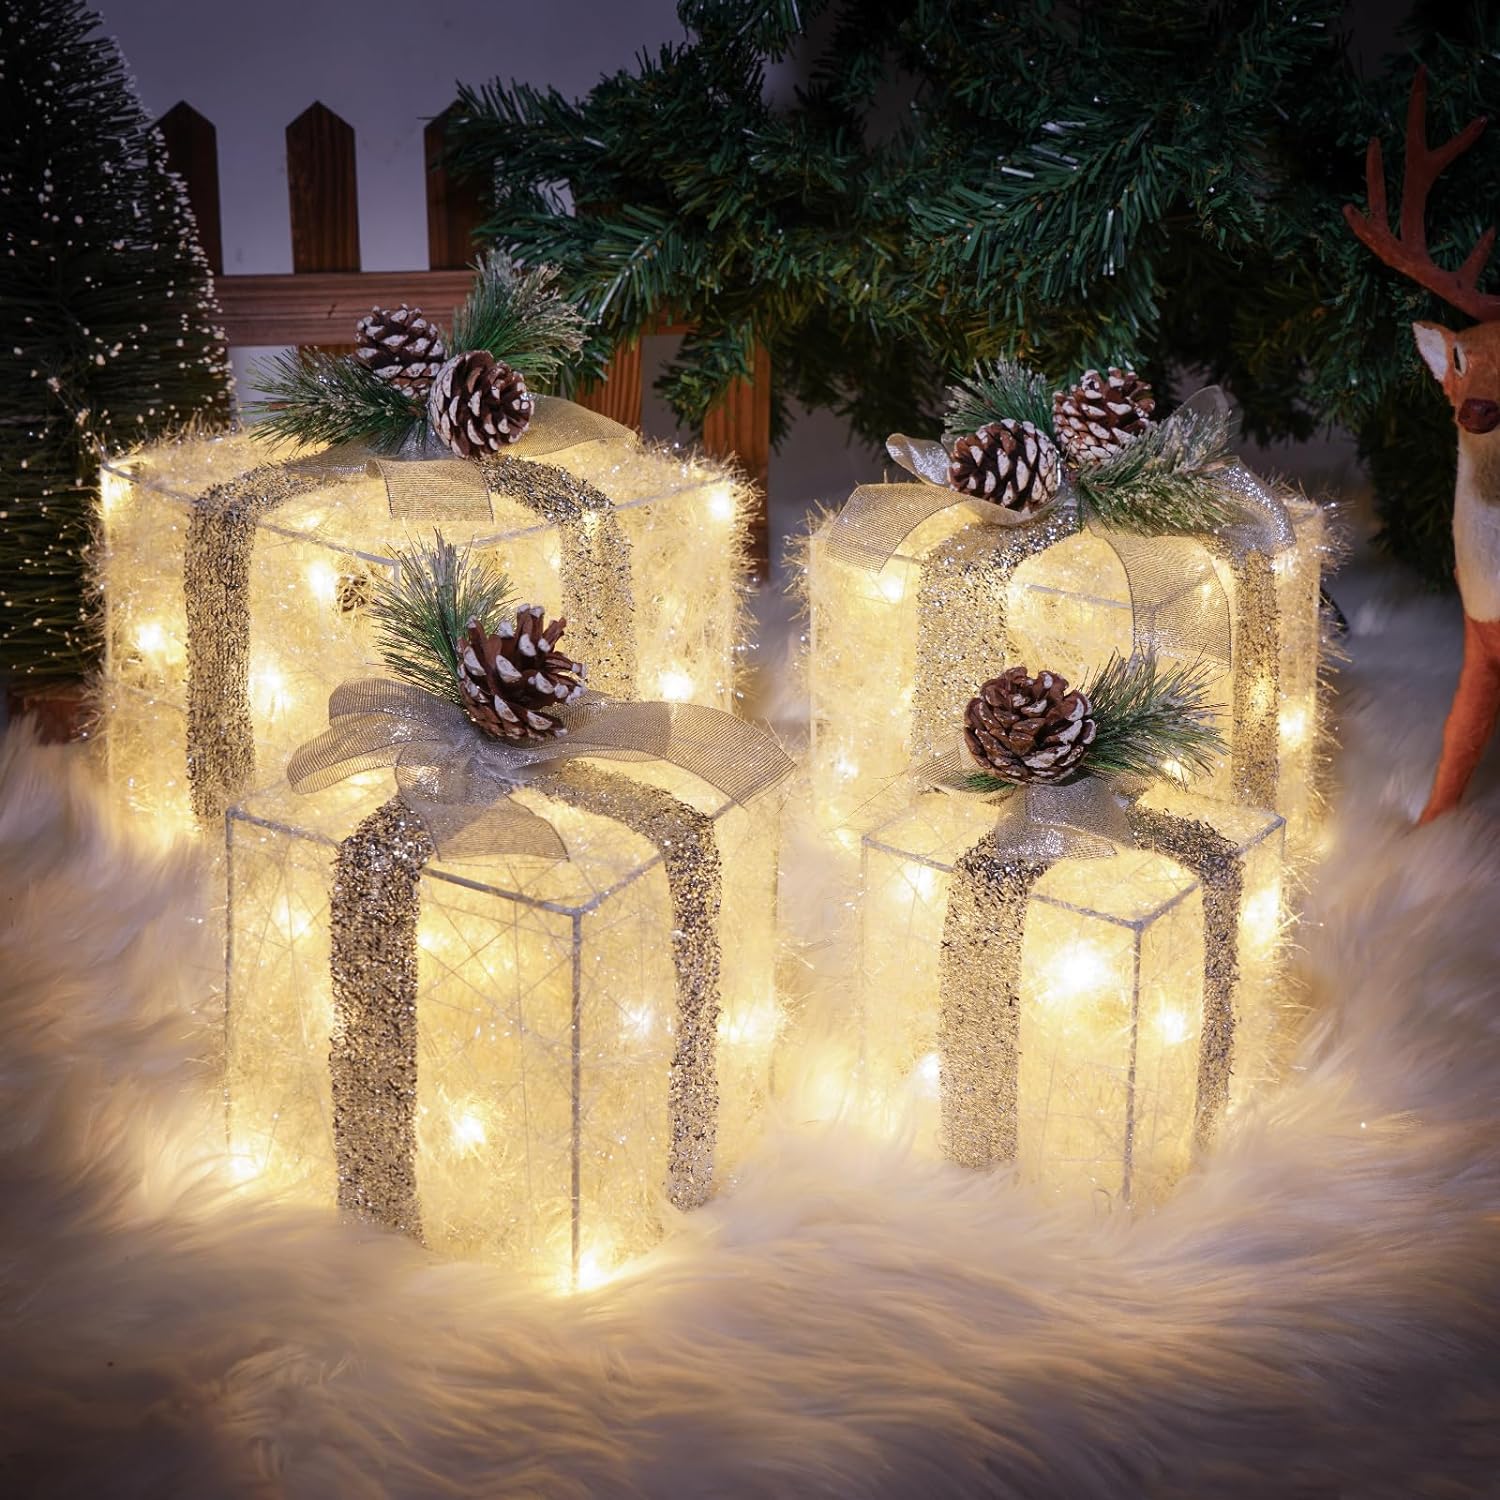 COVFEVER Set of 4 Christmas Lighted Gift Boxes, Pre-lit Lights Gift Boxes, Light up Present Boxes Set Battery Operated with Different Sizes for Holiday Indoor Outdoor Decorations